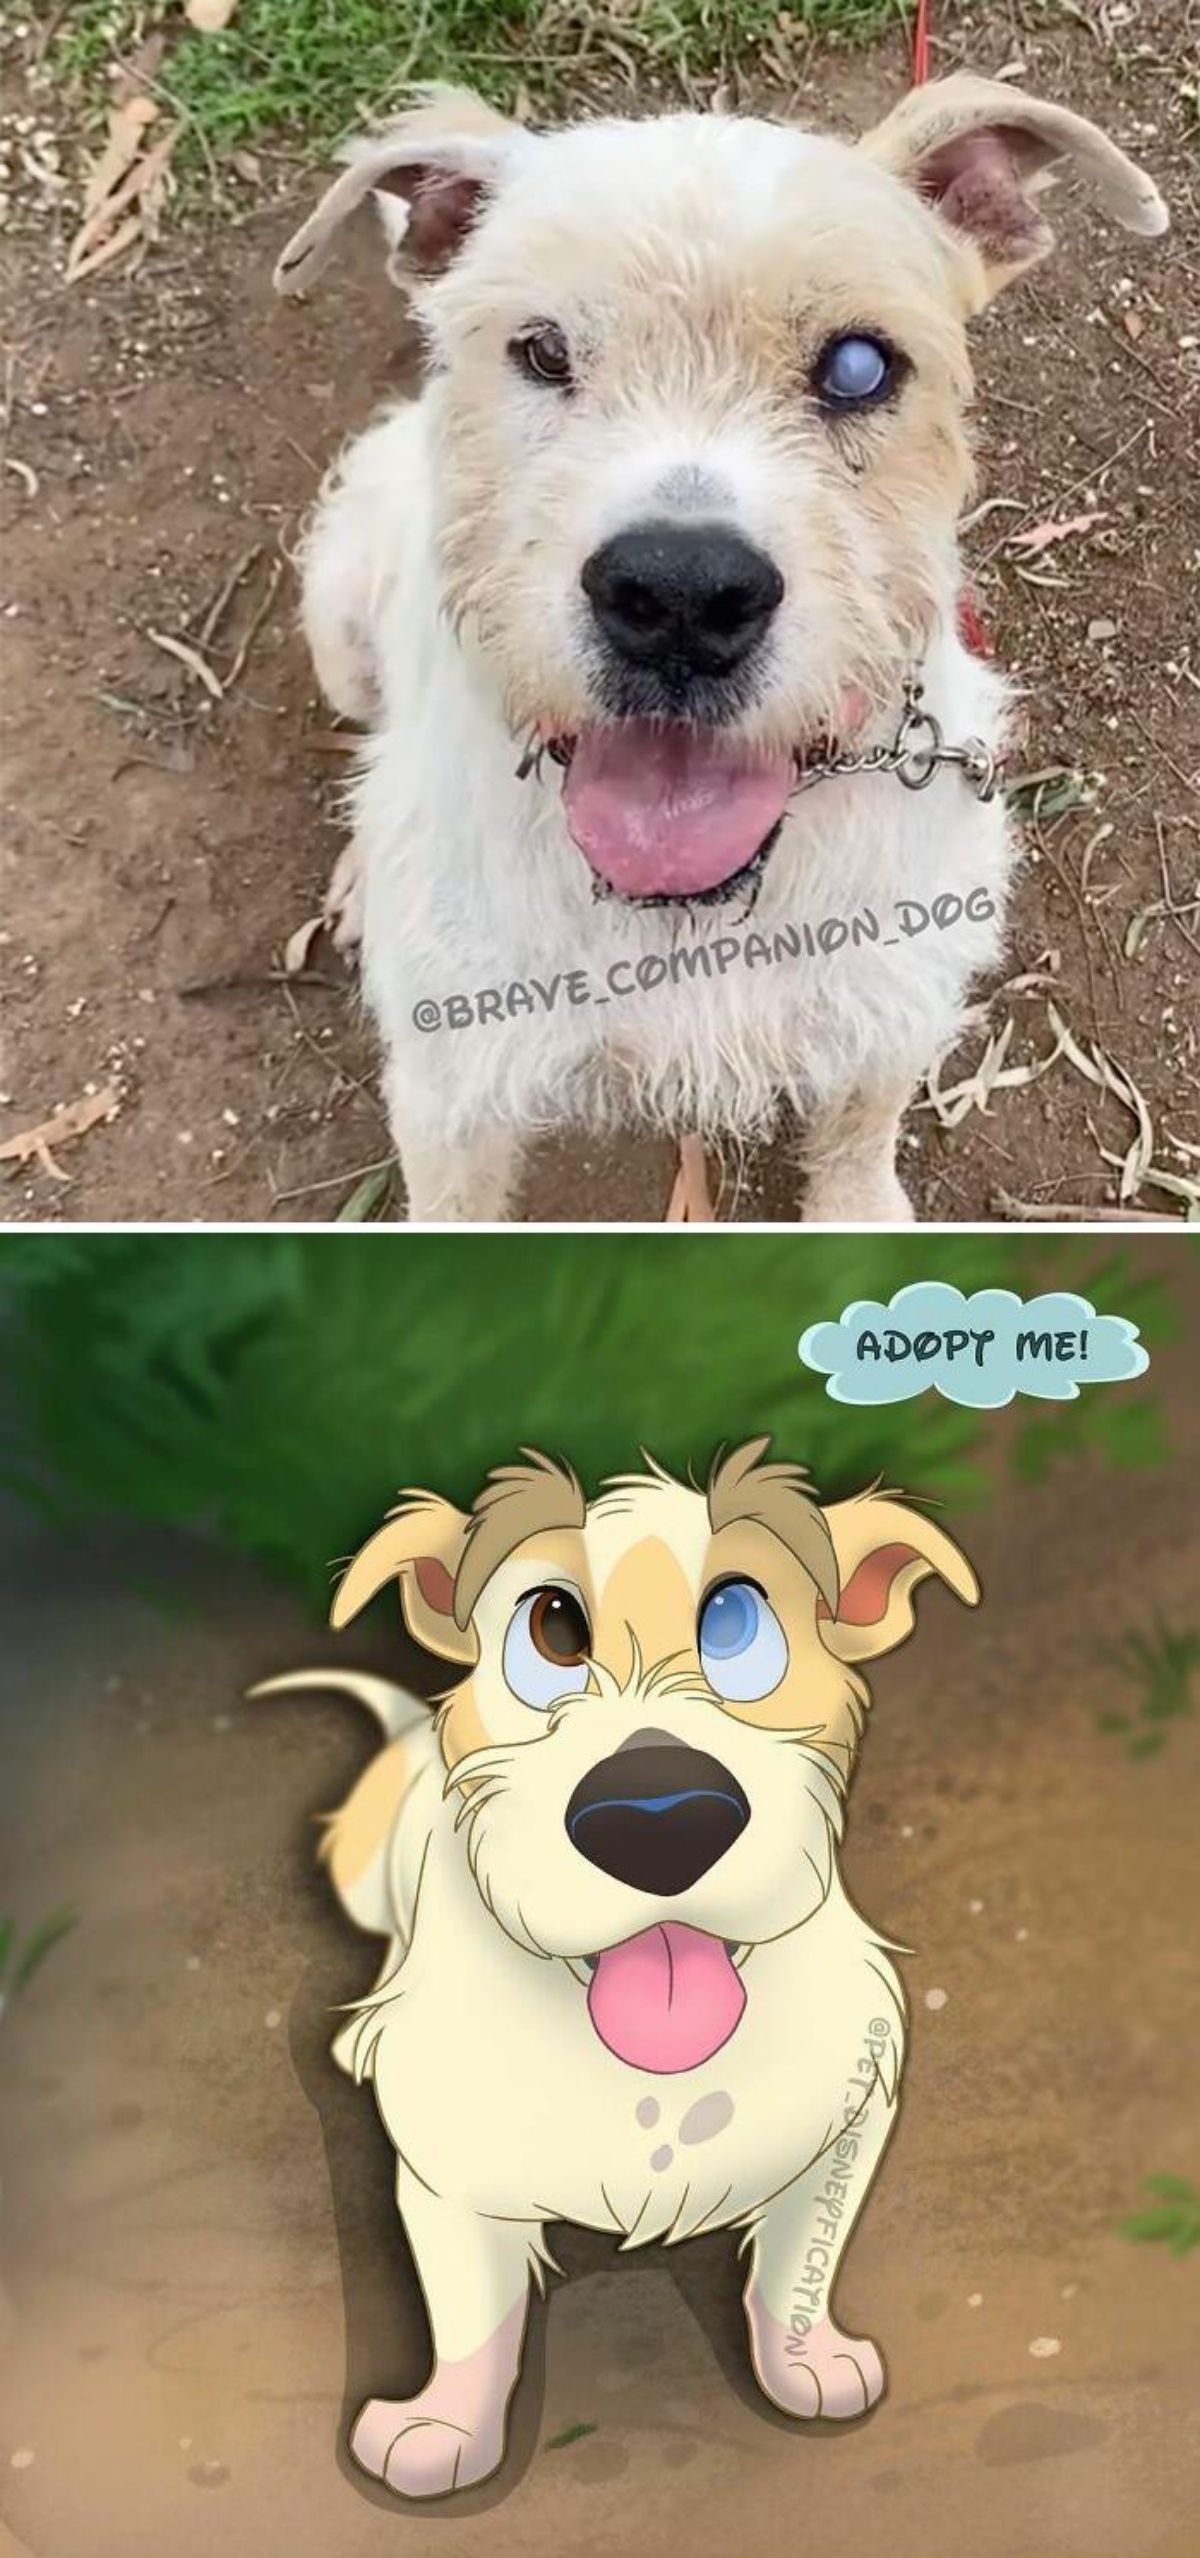 real photo and cartoon image of a white fluffy dog with one brown eye and one blue eye